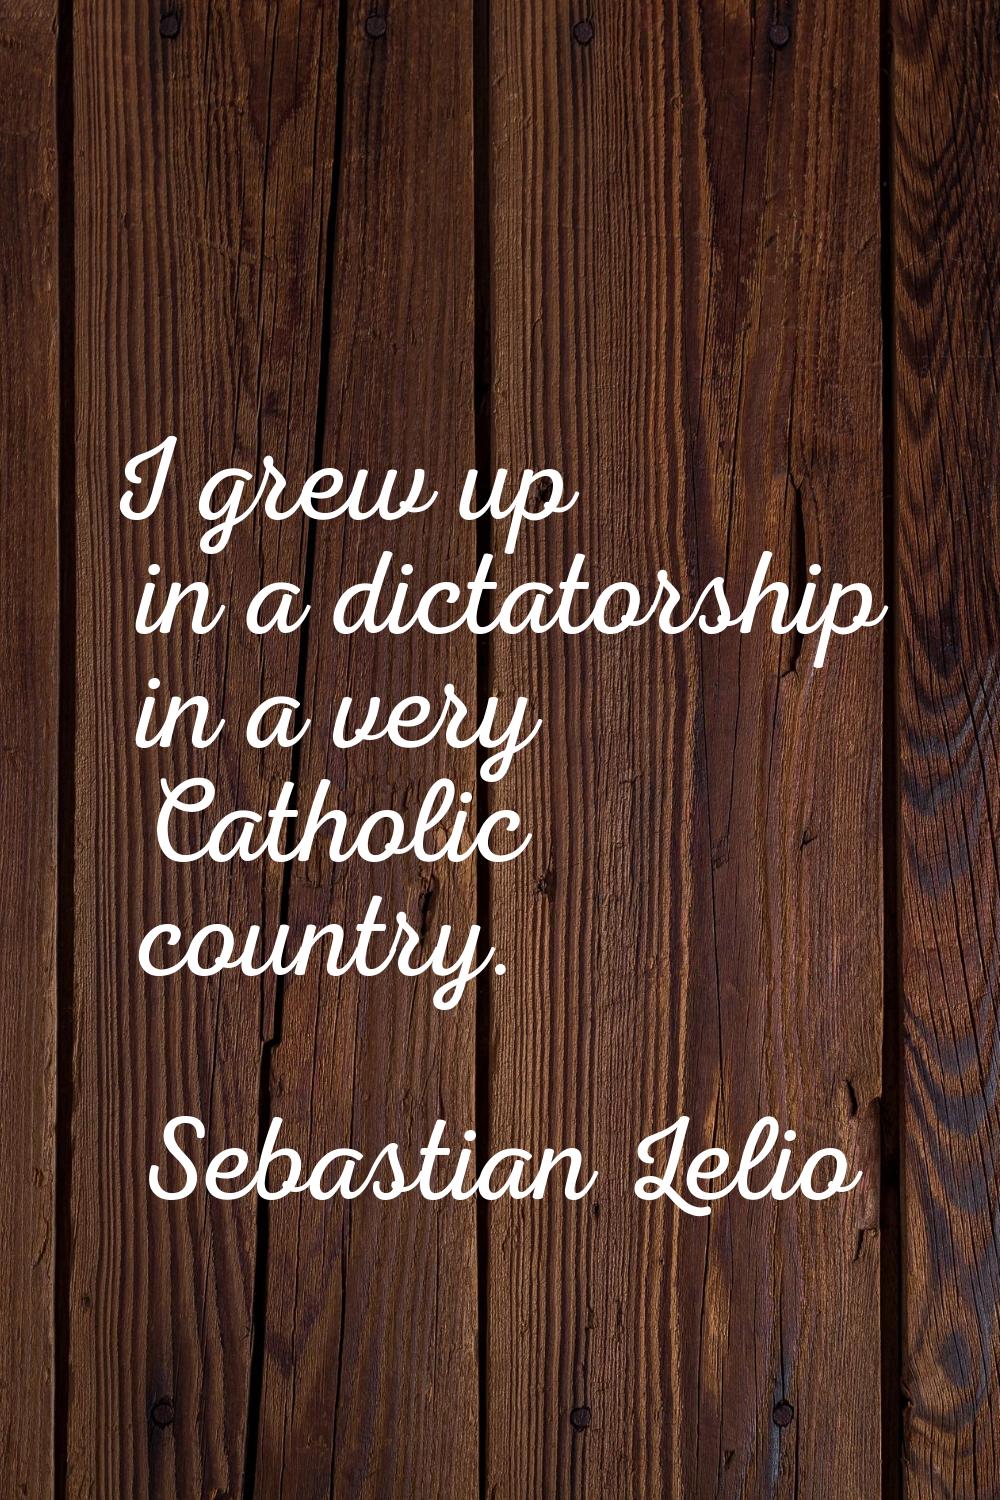 I grew up in a dictatorship in a very Catholic country.